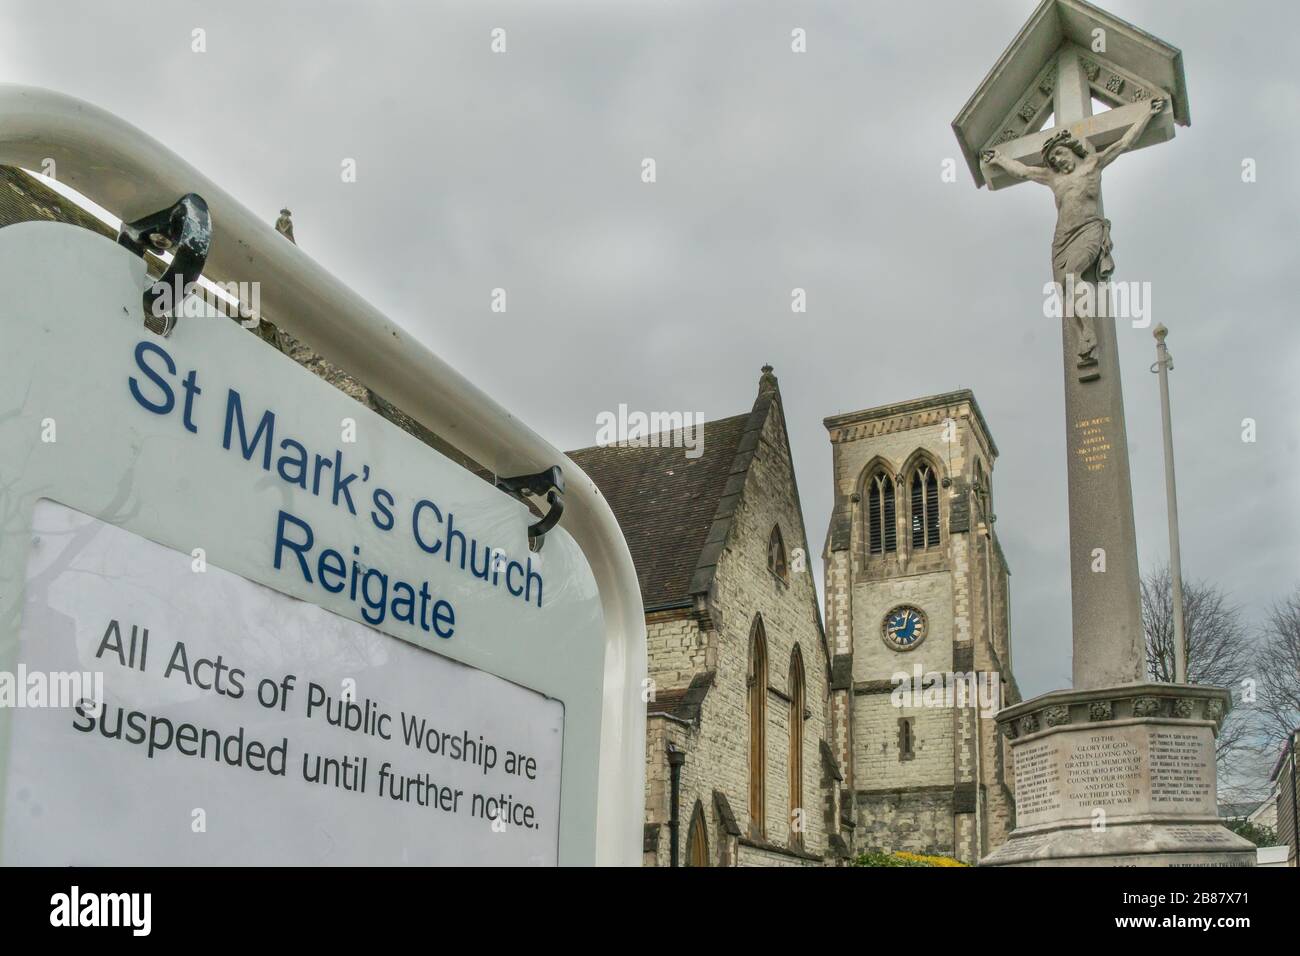 Reigate, Surrey, UK - March 20, 2019 - Saint Mark's parish church where all acts of public worship were cancelled due to COVID-19 outbreak Stock Photo